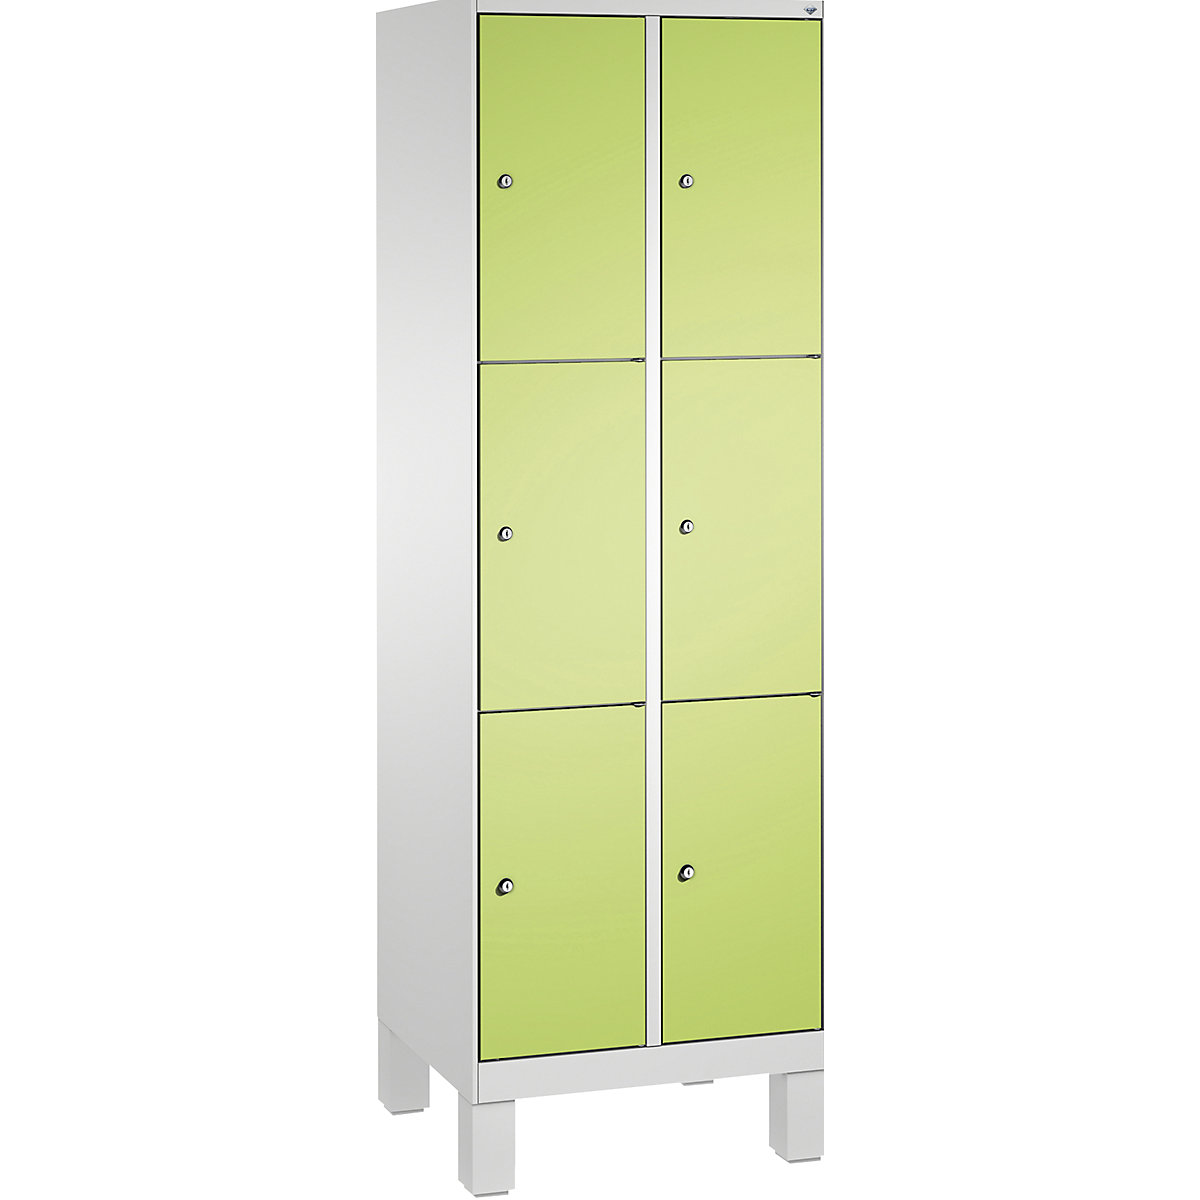 EVOLO locker unit, with feet – C+P, 2 compartments, 3 shelf compartments each, compartment width 300 mm, light grey / viridian green-9